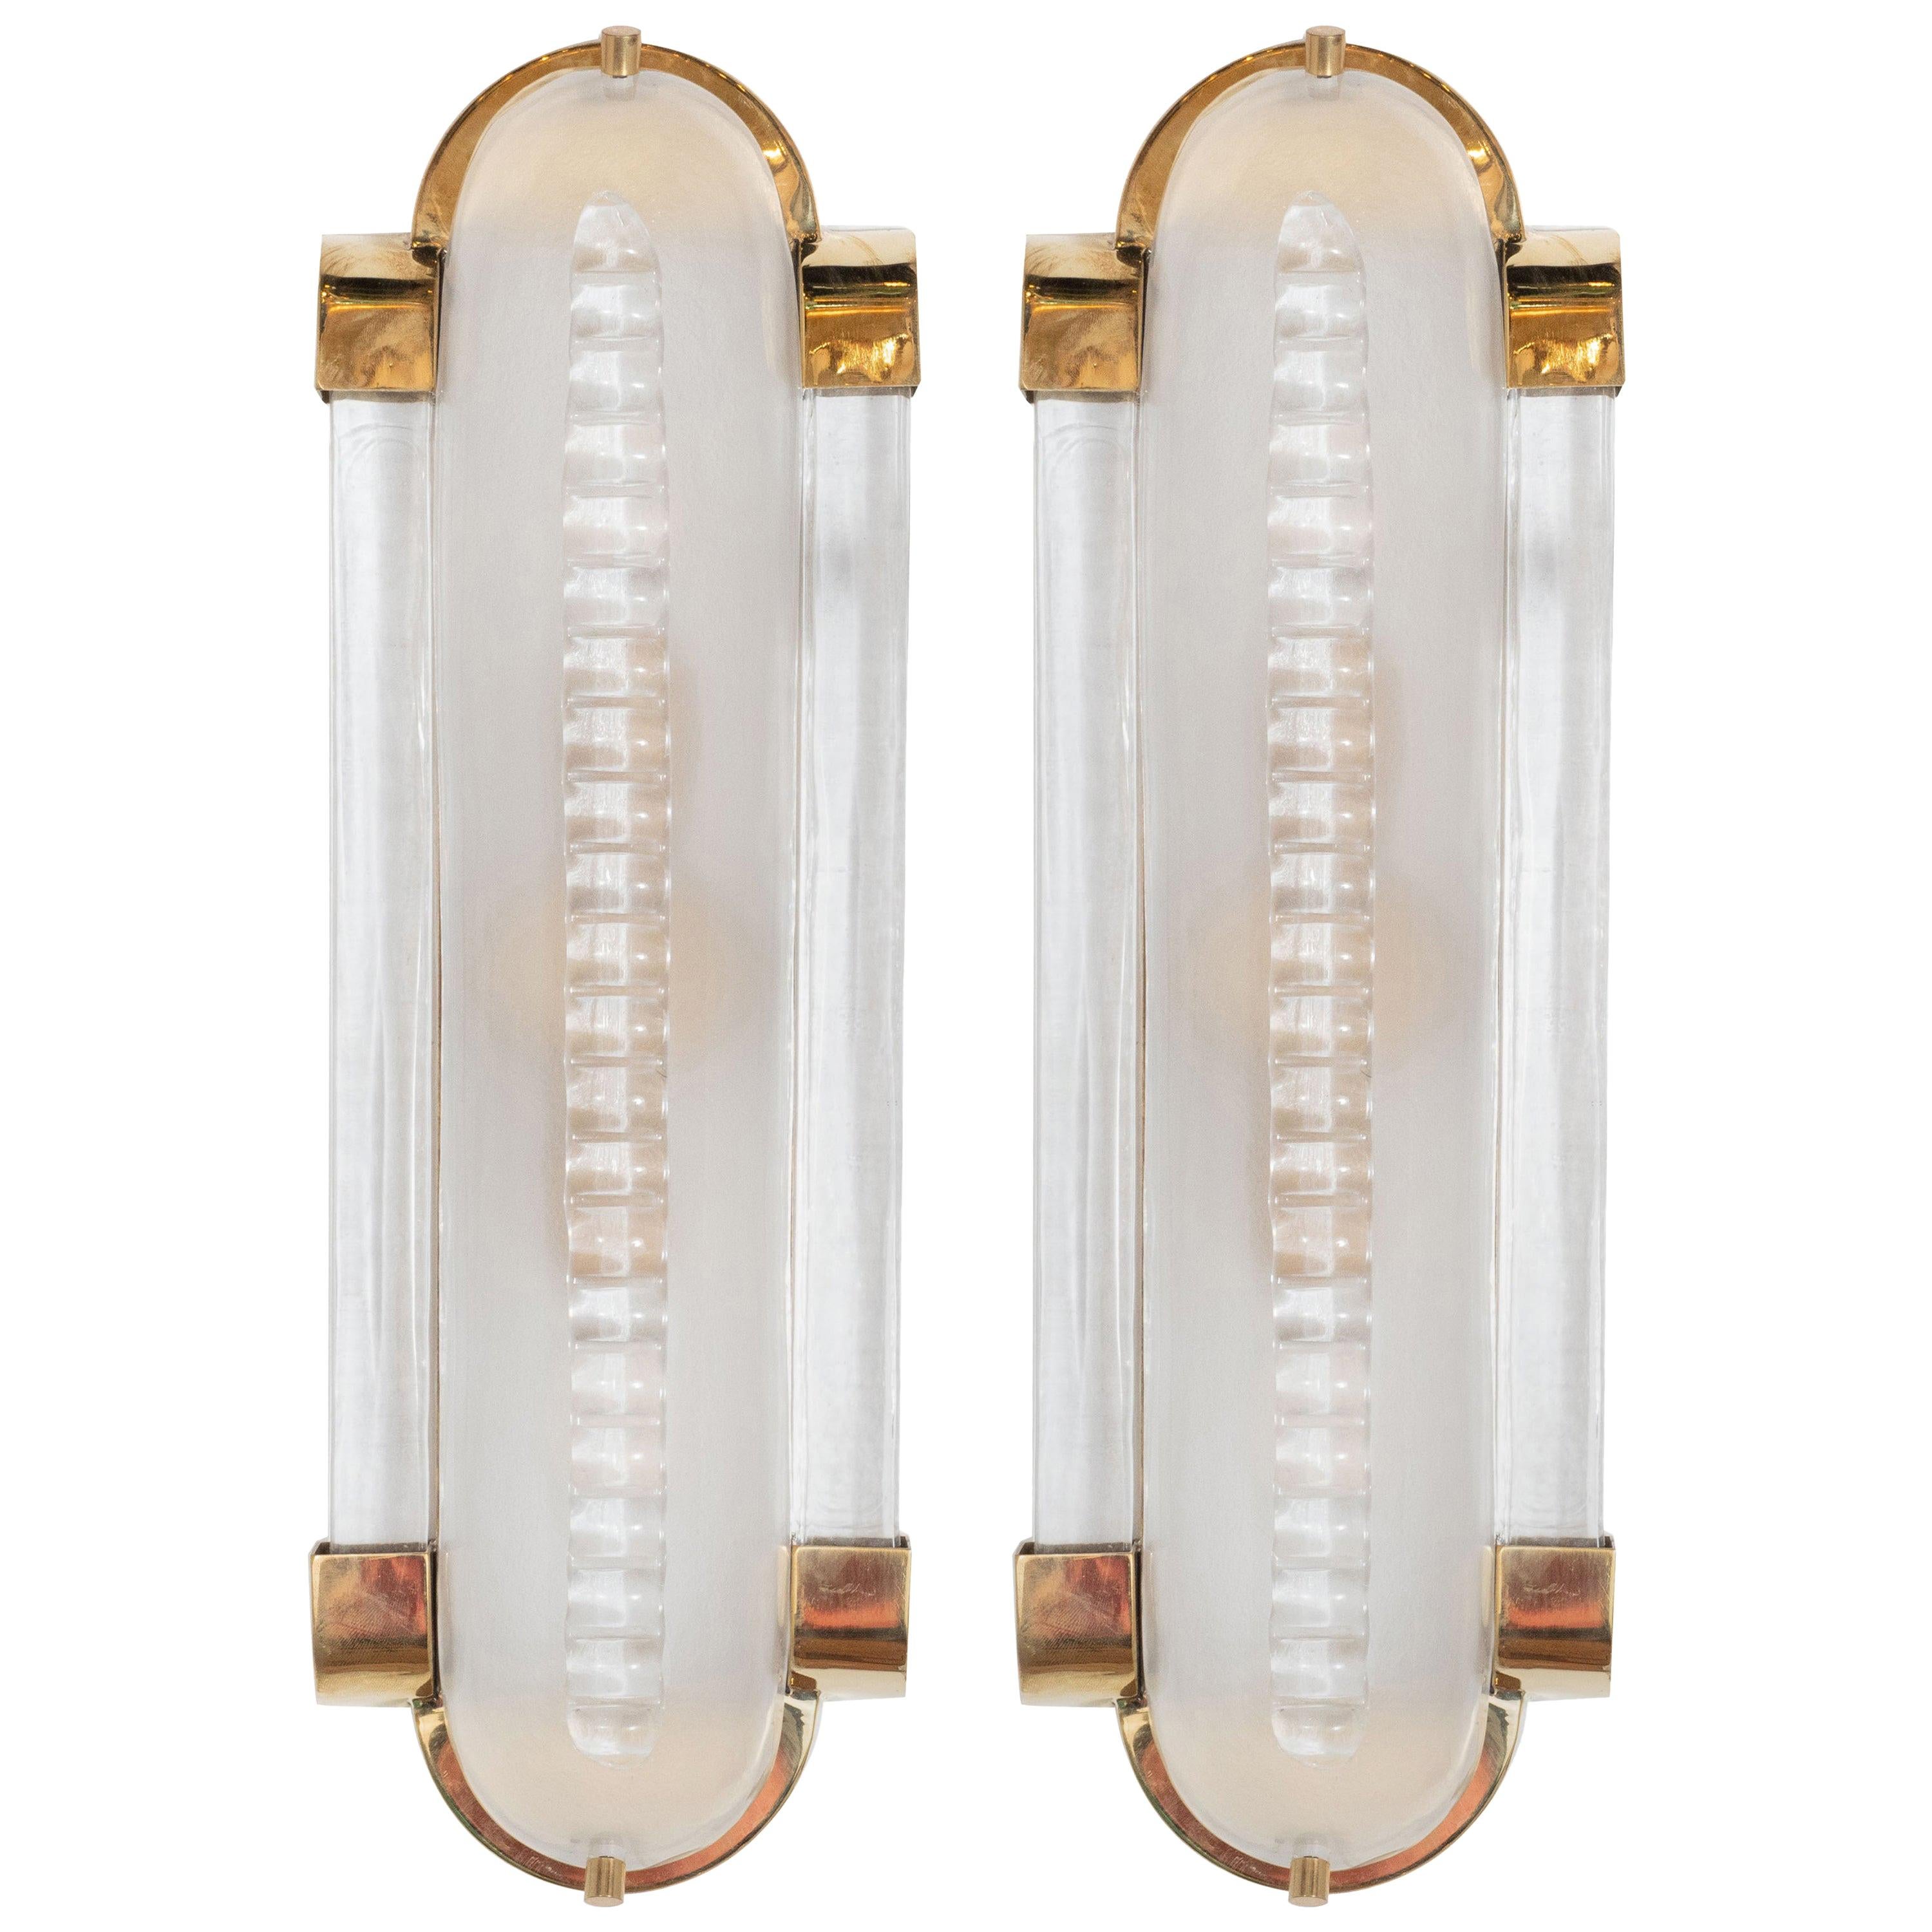 Pair of Translucent White Murano Glass and Brass Sconces, Italy